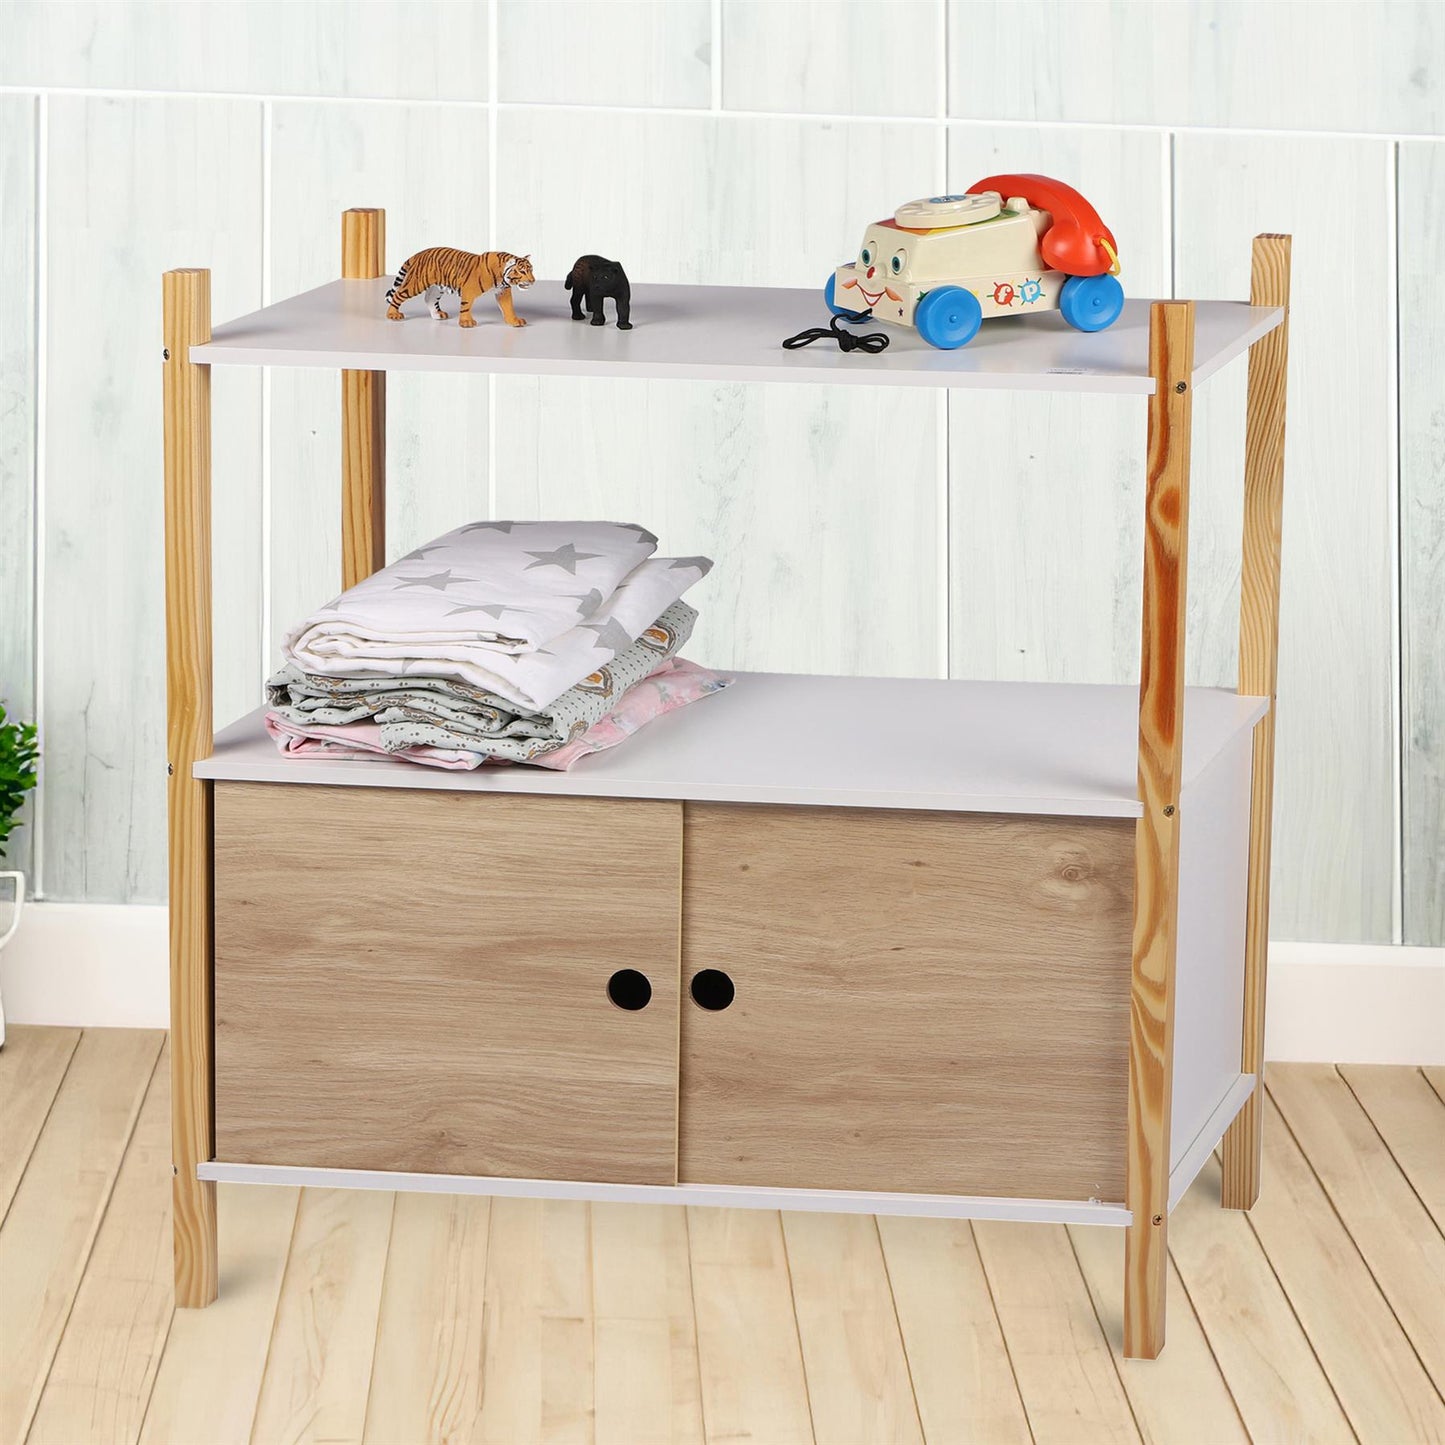 Kids' Bedroom Storage Cabinet With Sliding Doors In White Wood Finish